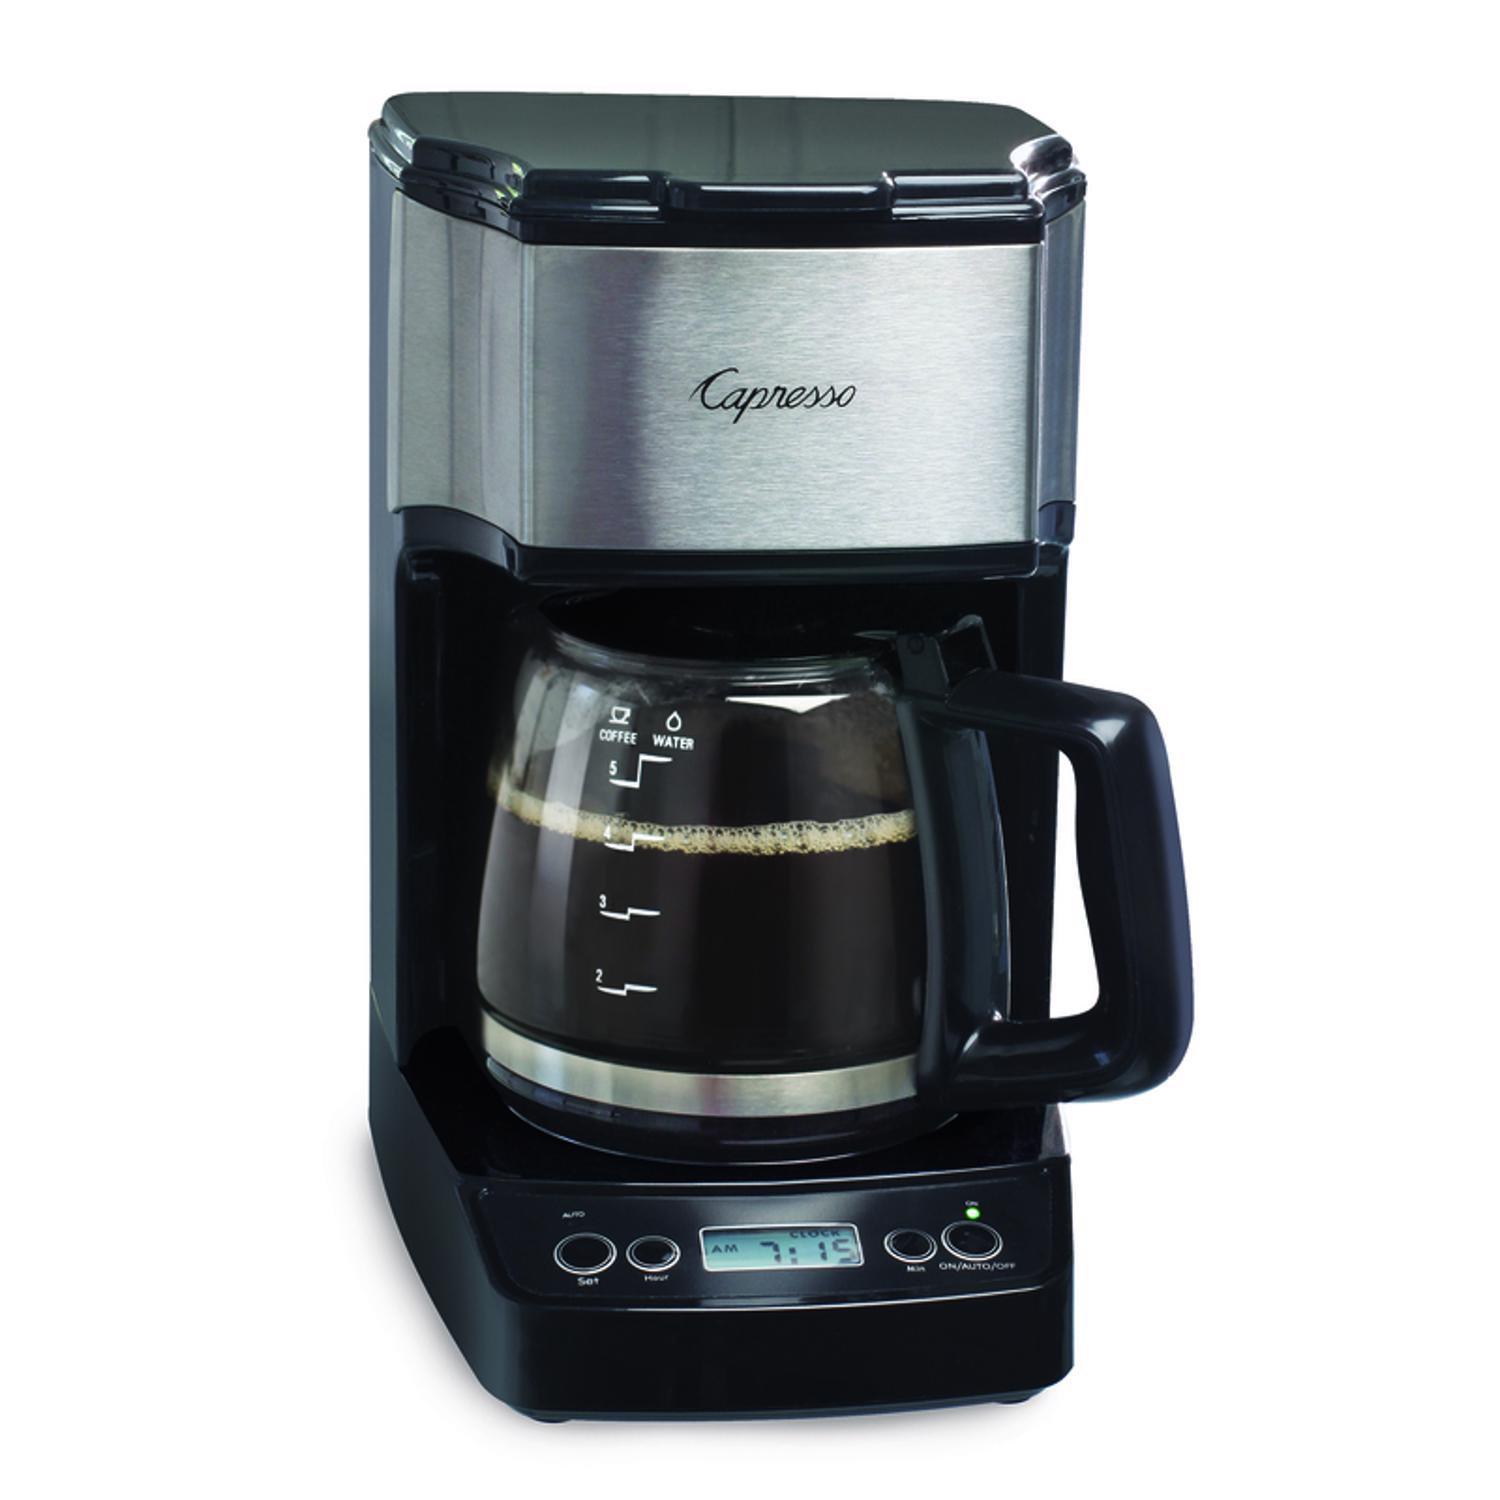 Holstein Housewares 5 Cup Coffee Maker - Space-Saving Design, Auto Pause  and Serve, Removable Filter Basket, and Full View Water Window - Perfect  for Brewing Rich-Tasting Coffee at Home - Black 